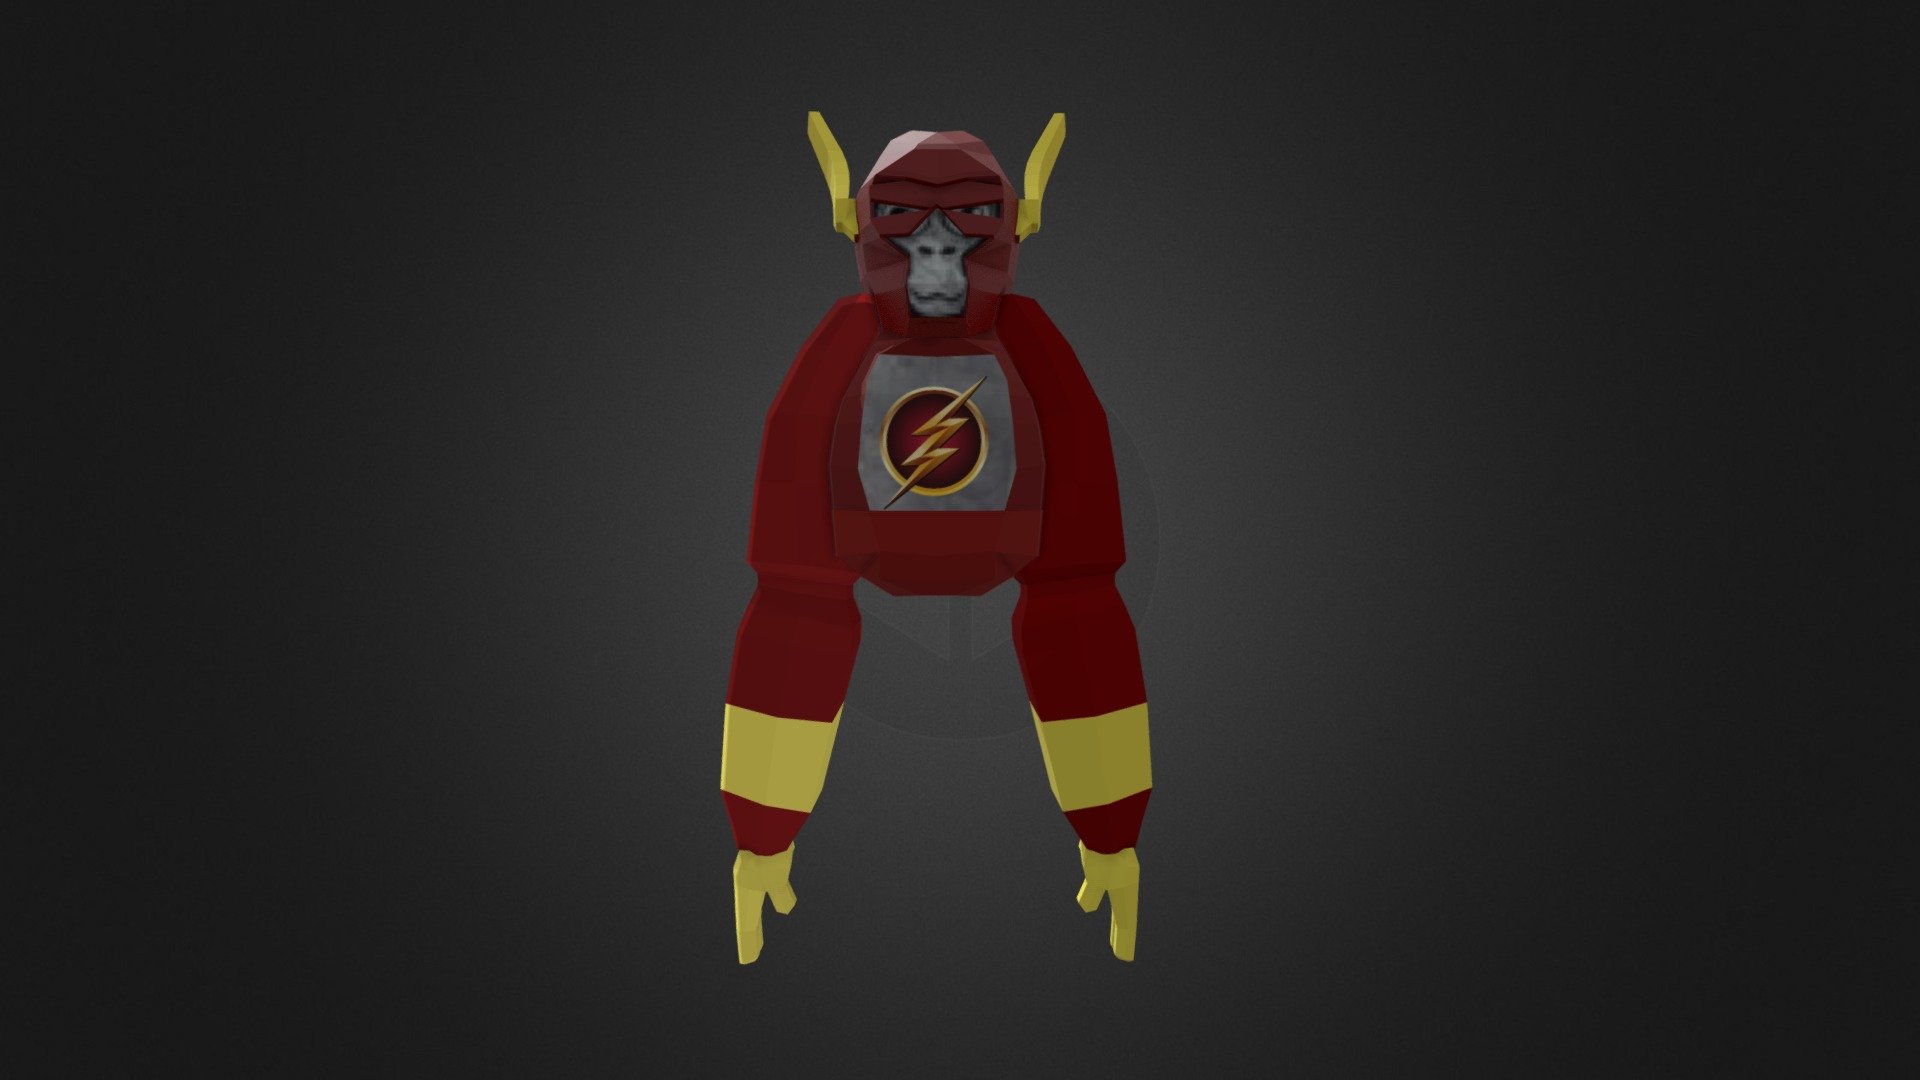 Download the model here

https://www.buymeacoffee.com/nimagin/e/145894

Rigged blender File with IK
Animated blender file
Animated blender file with animation
Animated FBX FILE
Textures


gorillatag #gorillatagvr #flash - Gorilla TAG but Flash - 3D model by Nofil.Khan 3d model